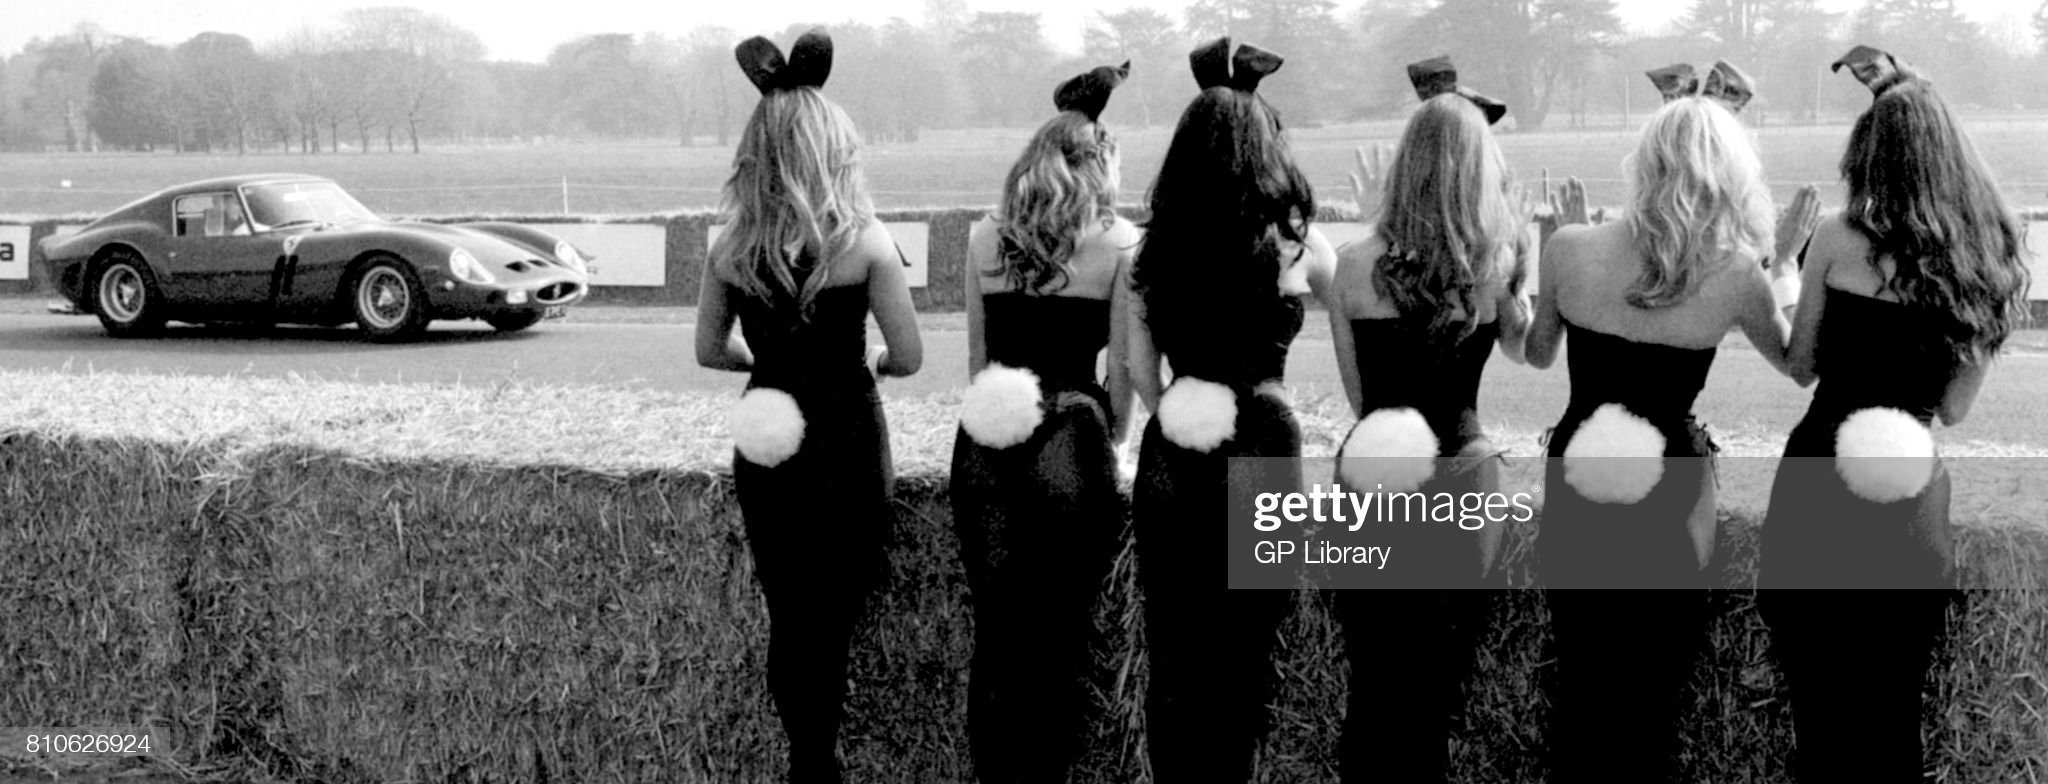 Bunny Girls watching Paul Vestey in a Ferrari 250 GTO at the Goodwood Festival of Speed on December 31, 1969.